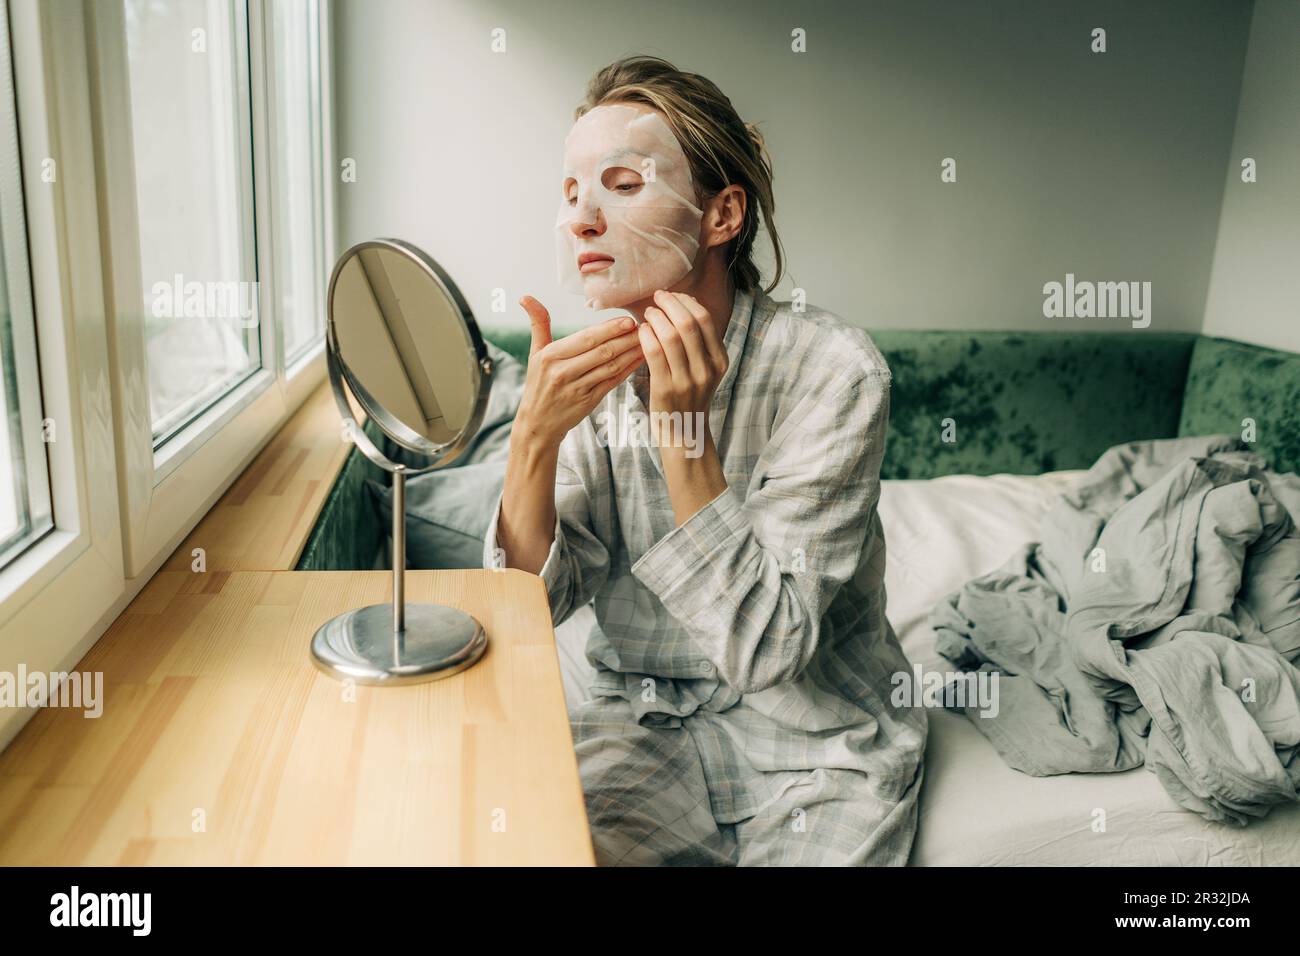 Woman using a cosmetic tissue face mask for selfcare. Stock Photo